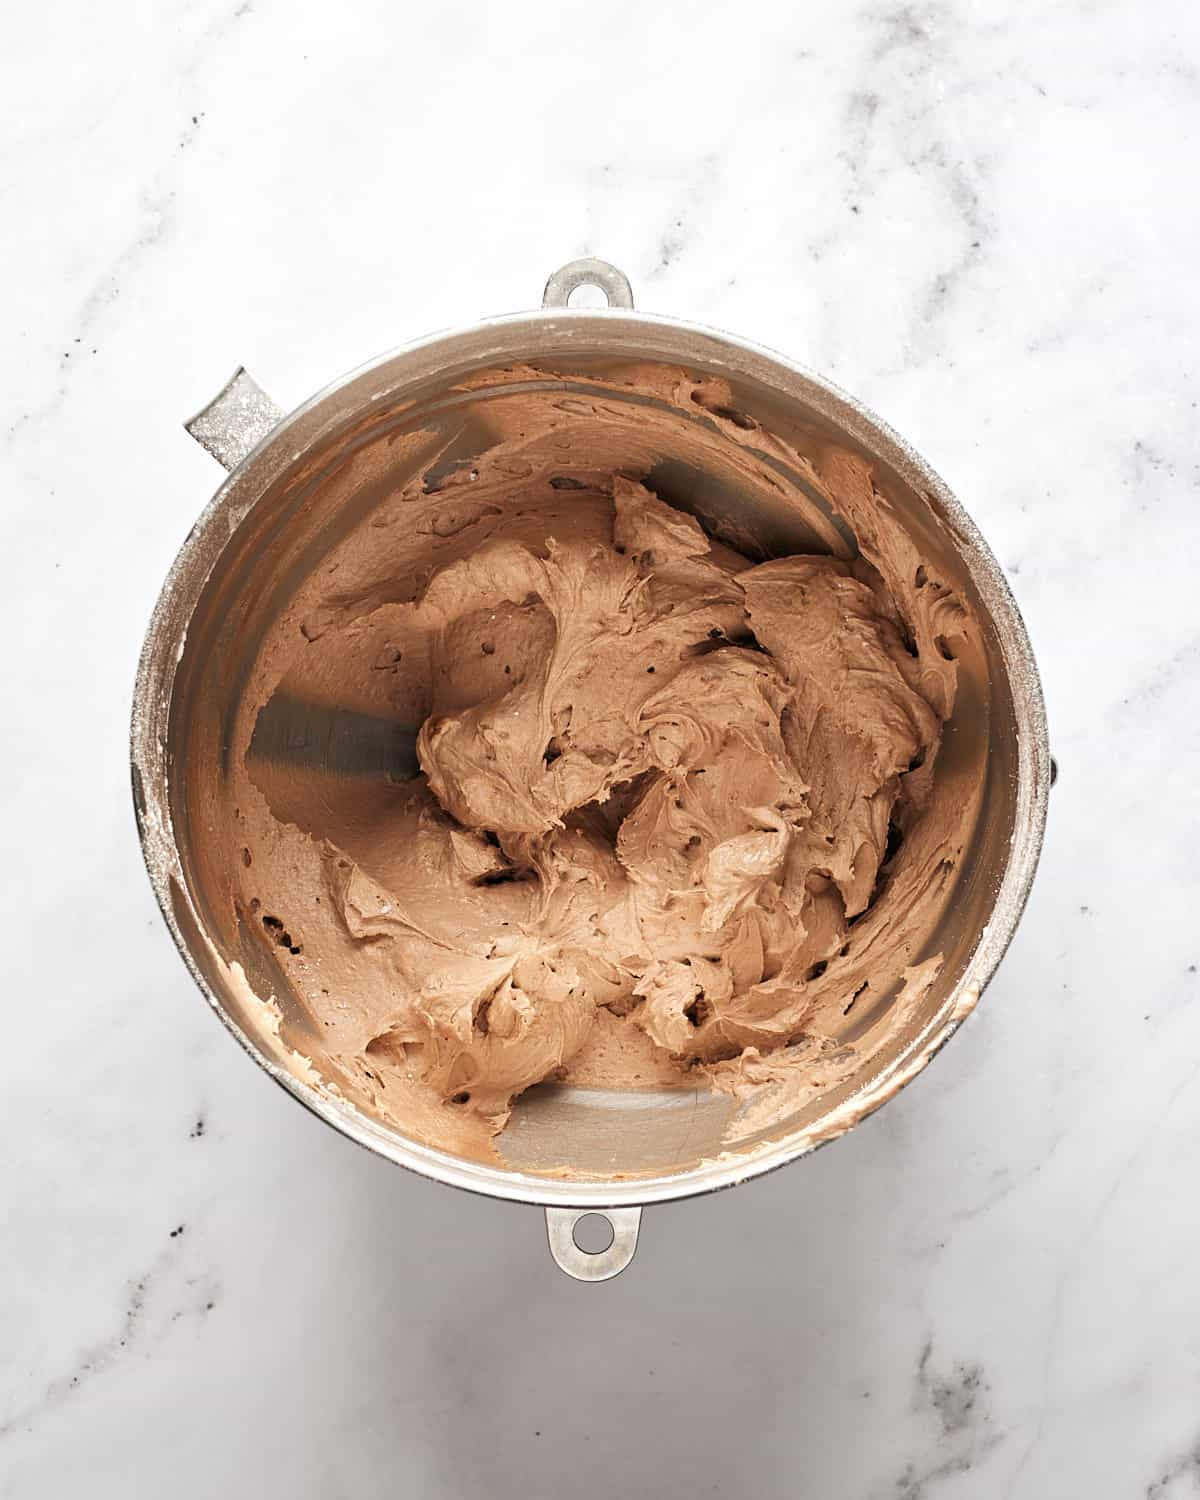 Overhead view of vegan chocoalte Irish Cream frosting in stainless steel mixing bowl on marble surface.